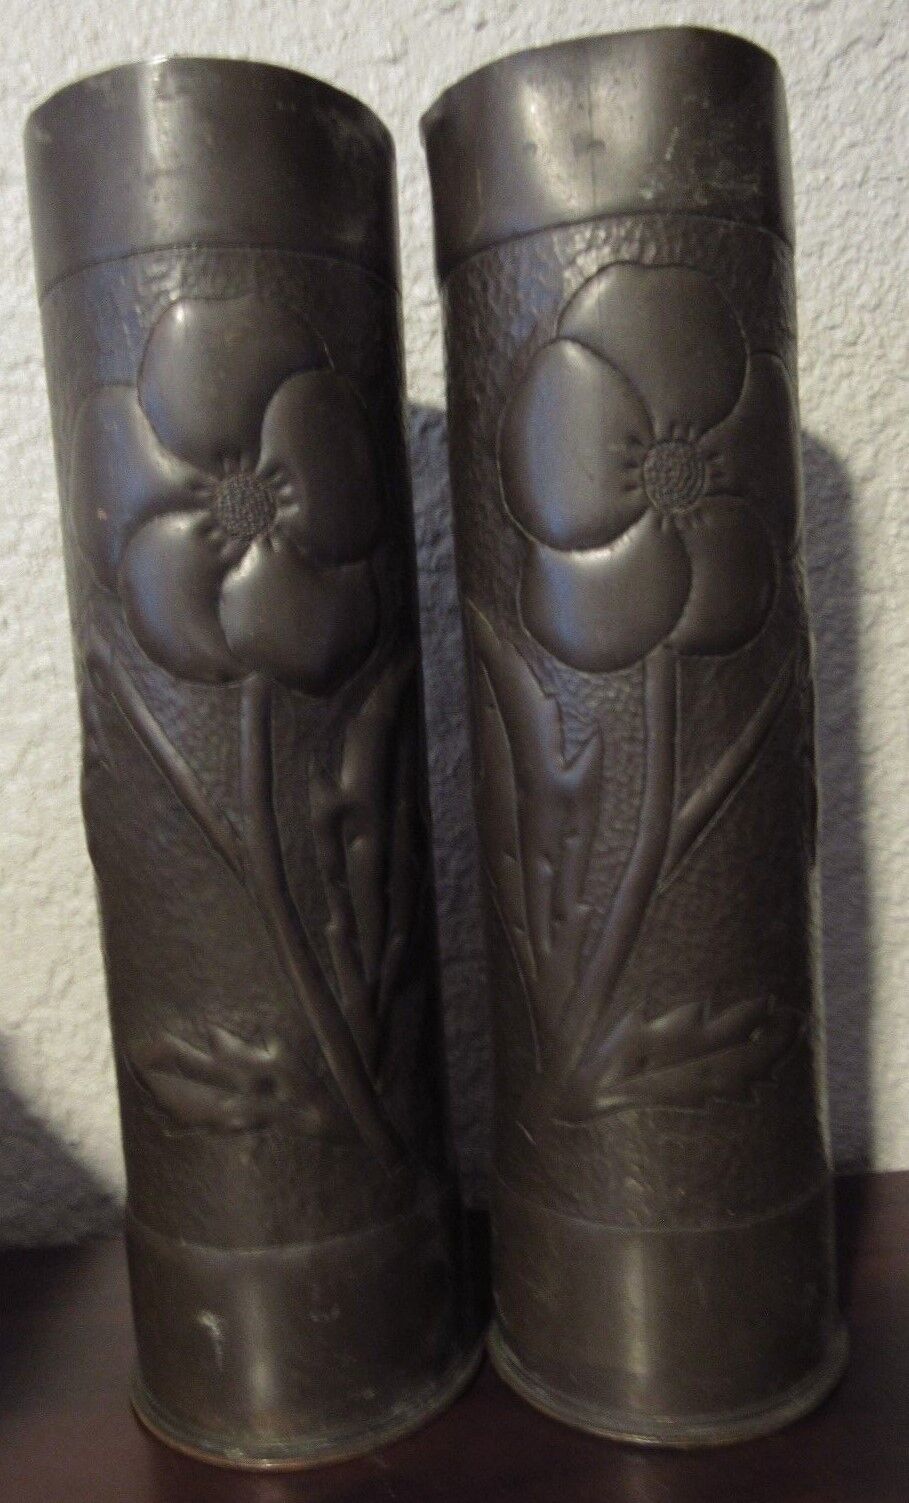 Matching Pair of WWI Trench Art Artillery Casing Vases - #2 Flower Style